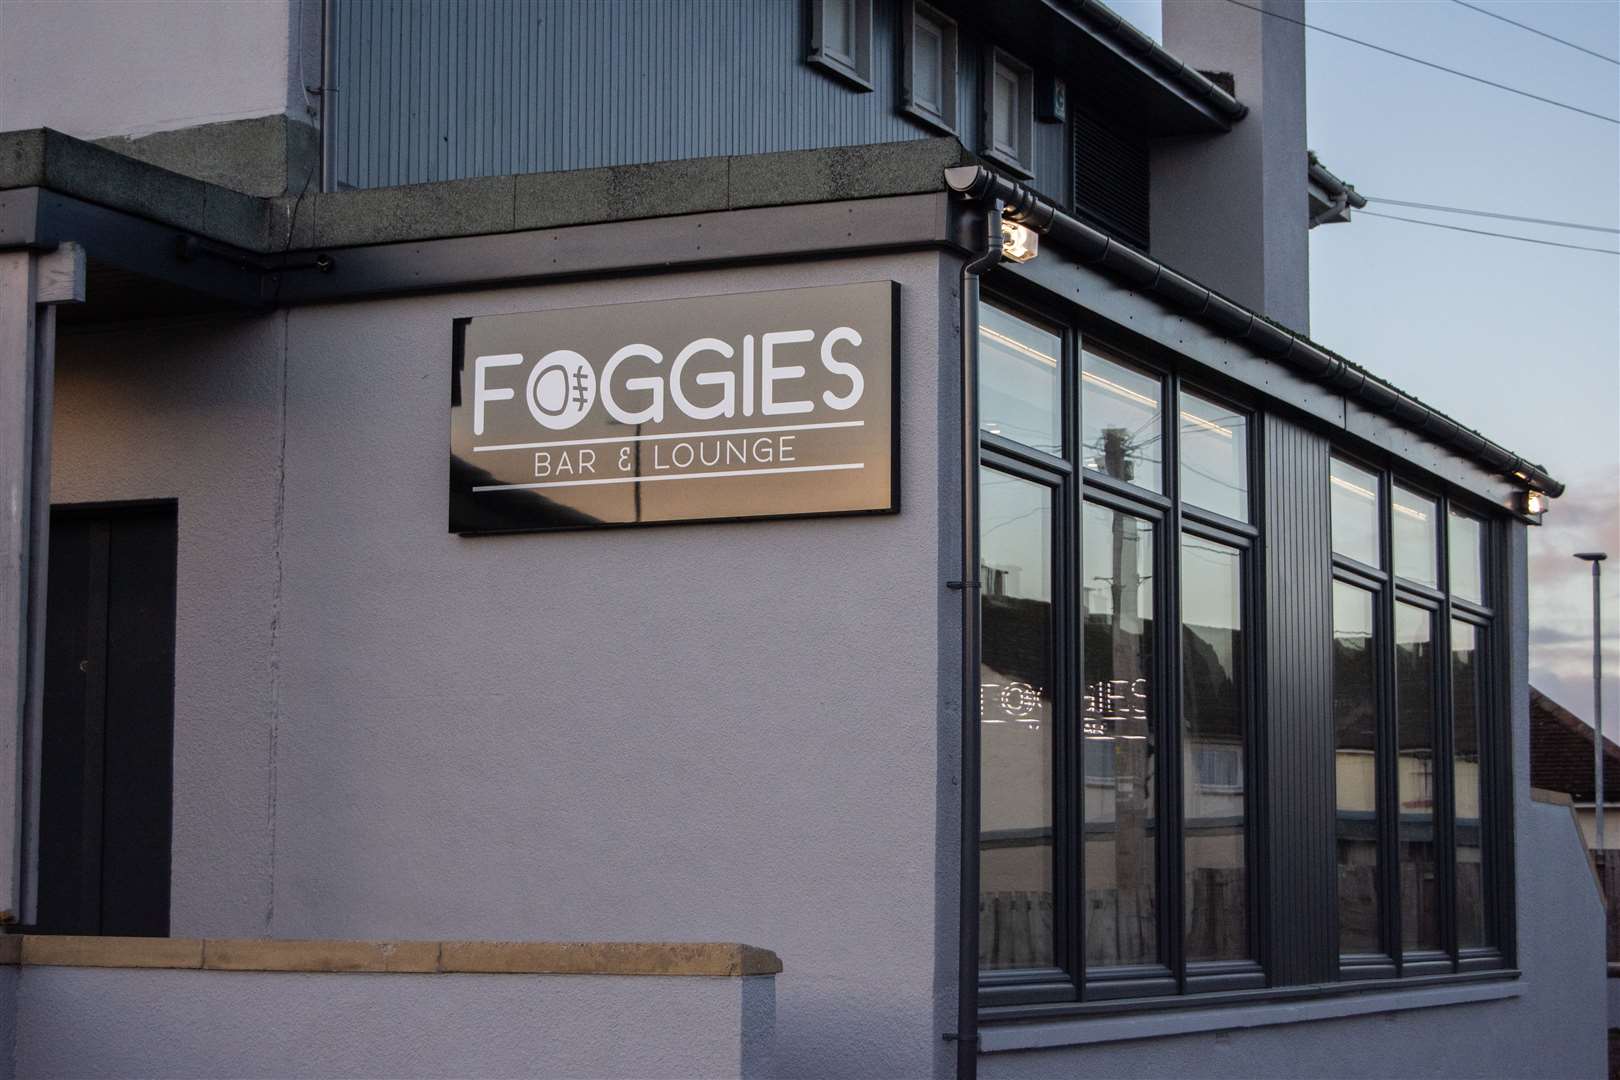 Foggies are opening a second bar in the old Bonnie Earl premises in Bishopmill, Elgin. Pictures: Daniel Forsyth